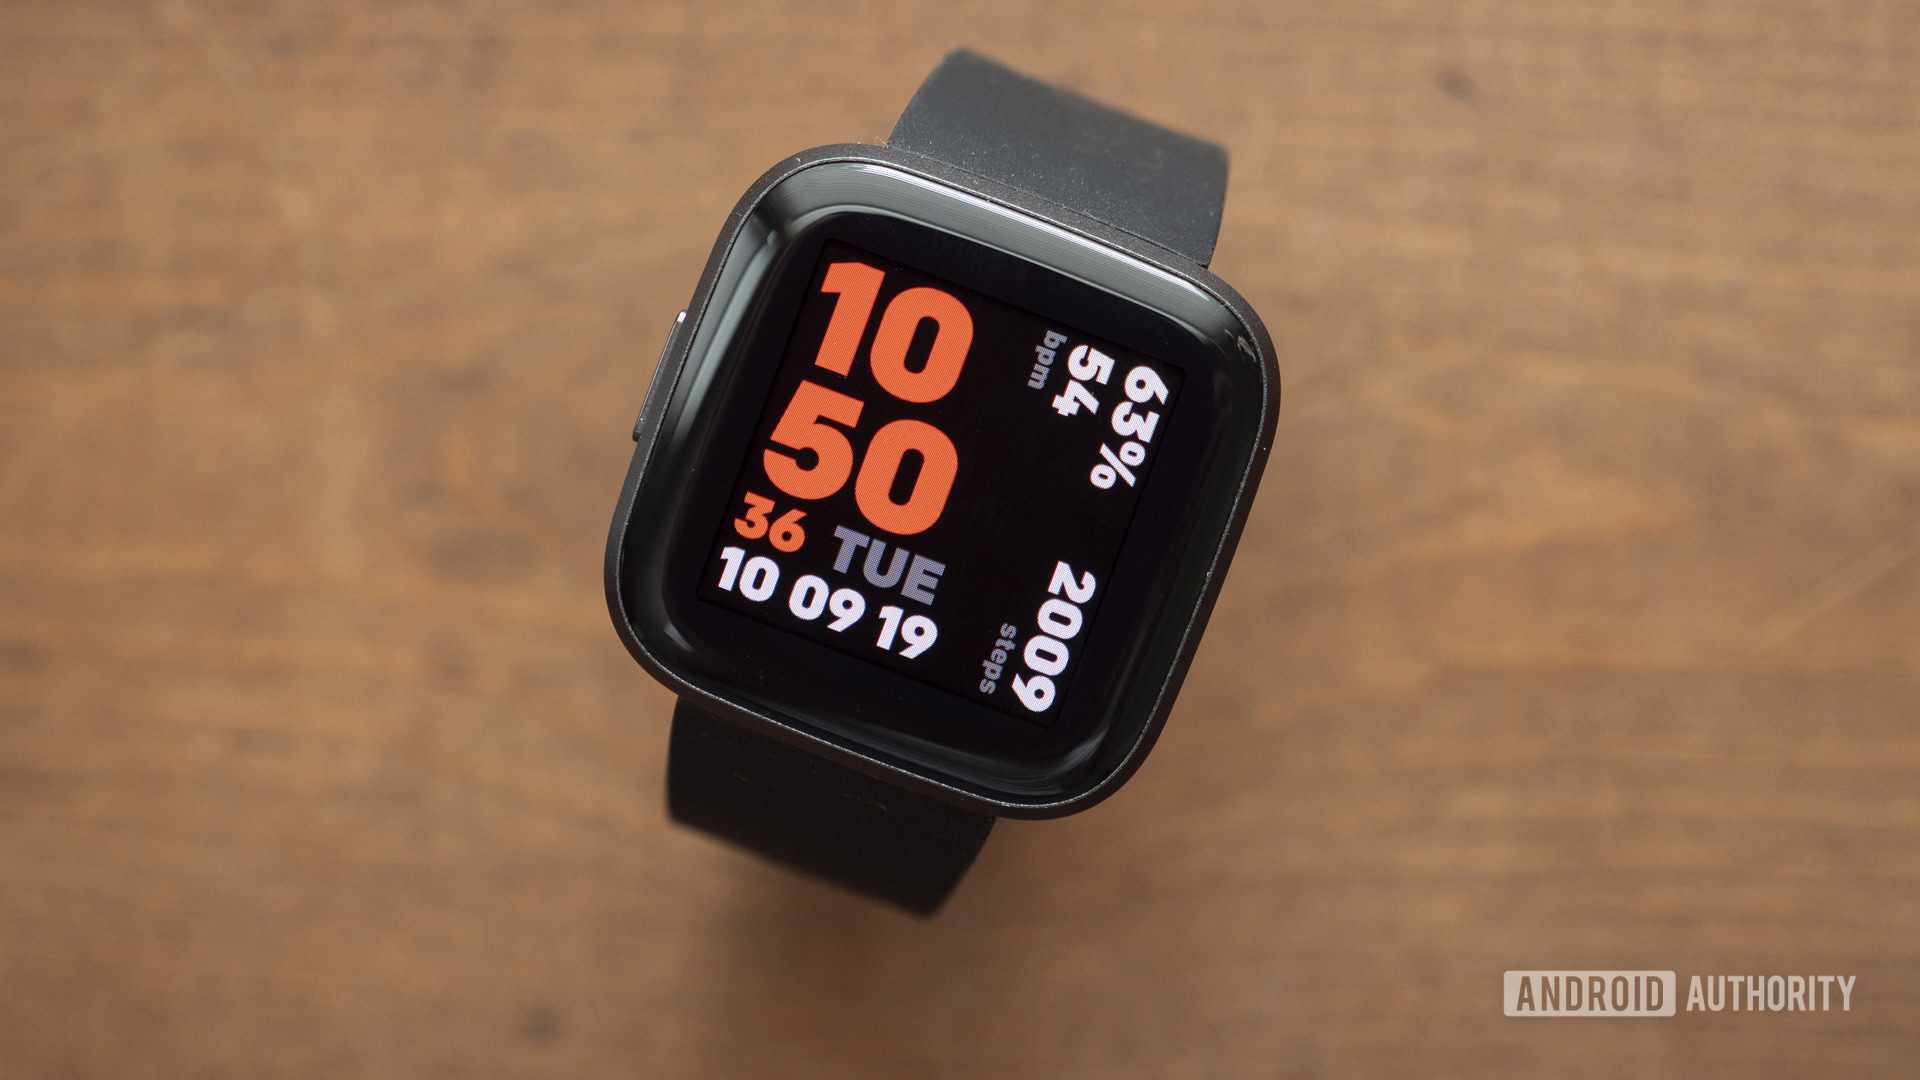 Fitbit Versa 1st generation hands-on review